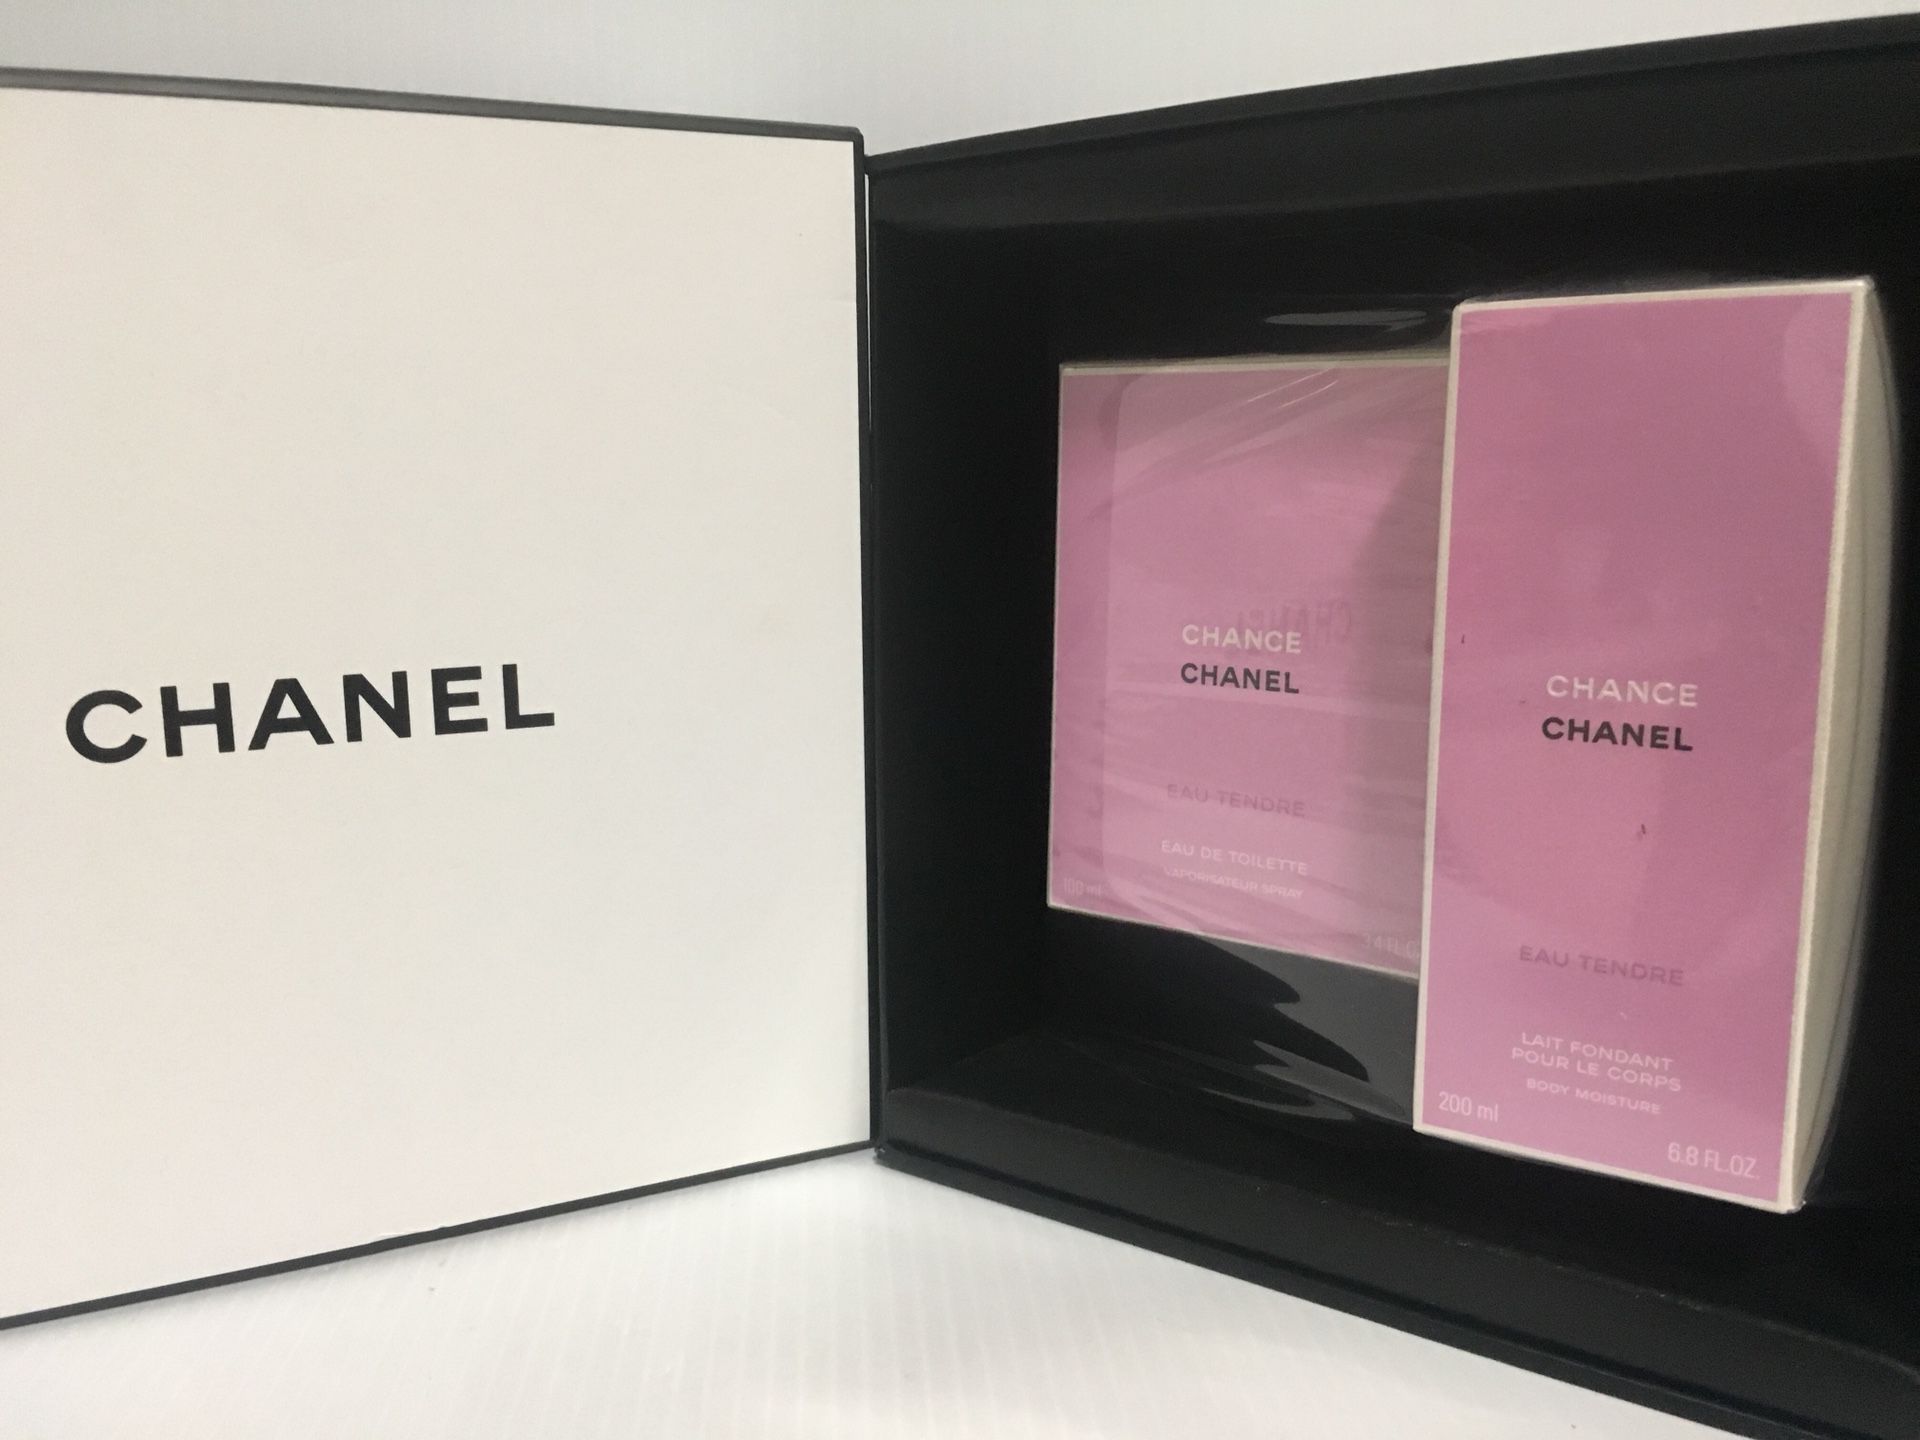 COCO MADEMOISELLE BY CHANEL PERFUME FOR WOMEN SPRAY 2PC GIFT SET 3.4 OZ +  0.7 OZ NEW IN BOX for Sale in Arlington, TX - OfferUp